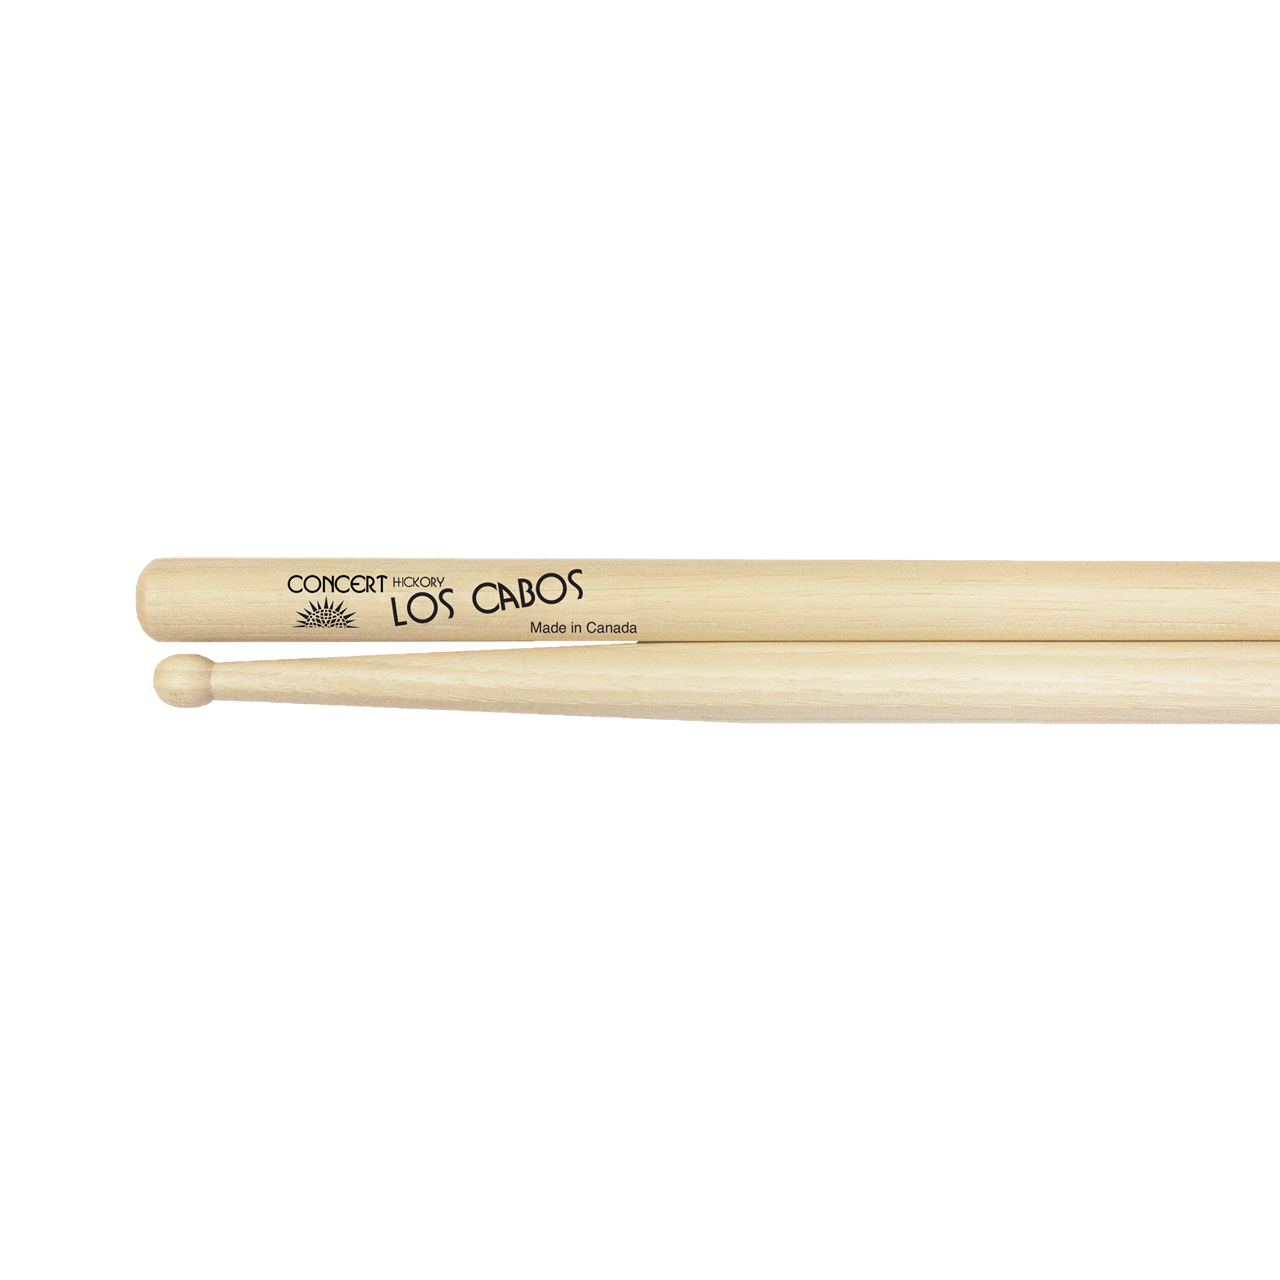 Los Cabos Drumstick Concert White Hickory